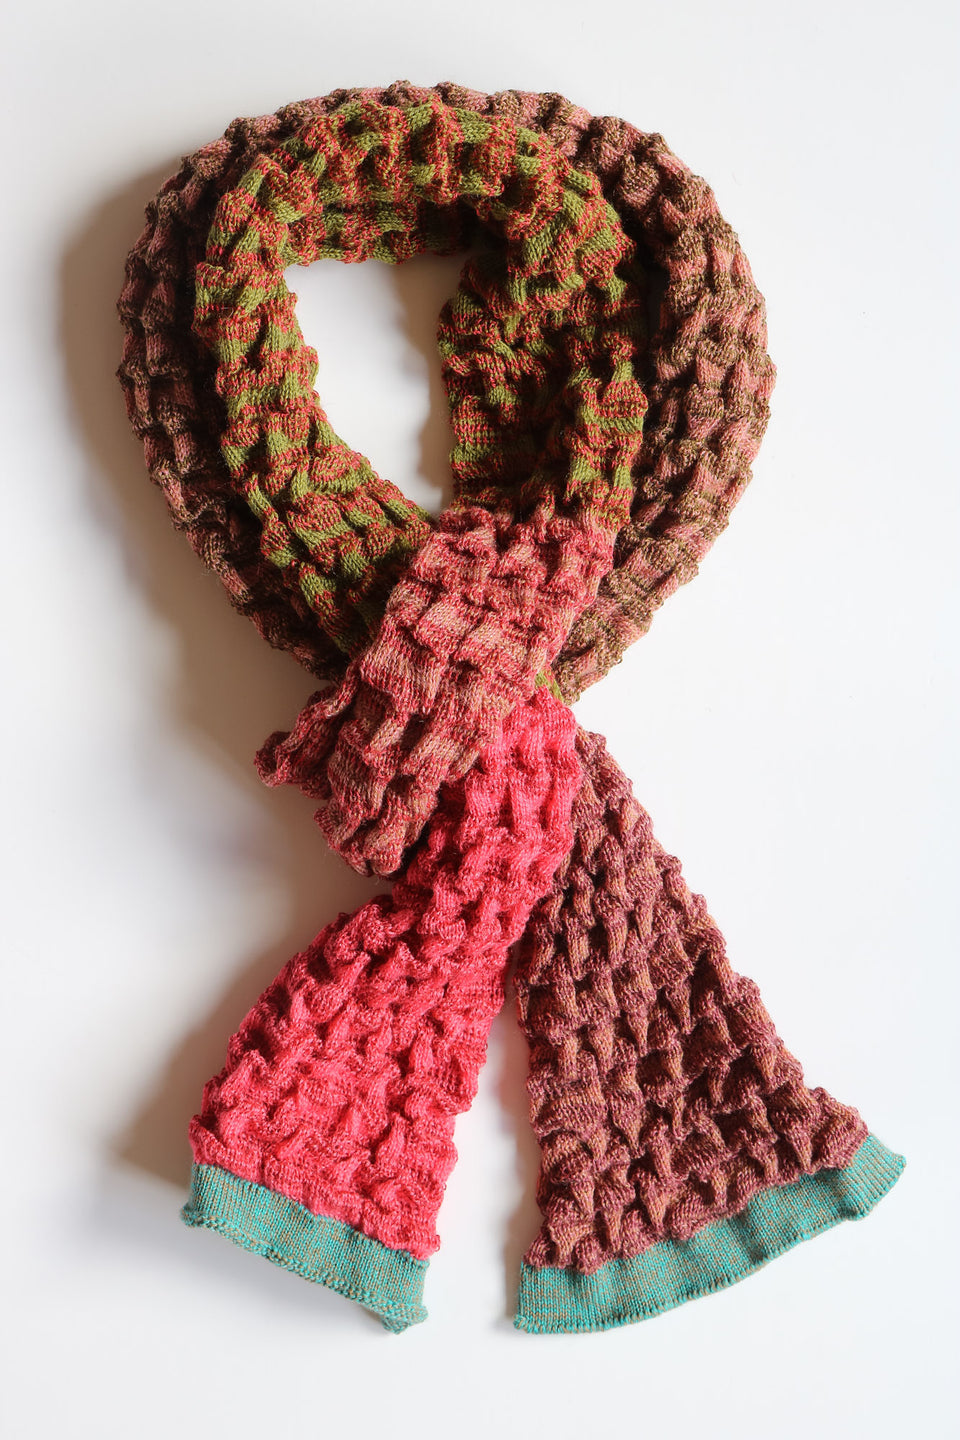 Rigg scarf. Ridged textile in stripes and colour blocks. Show in rose aqua gold mix